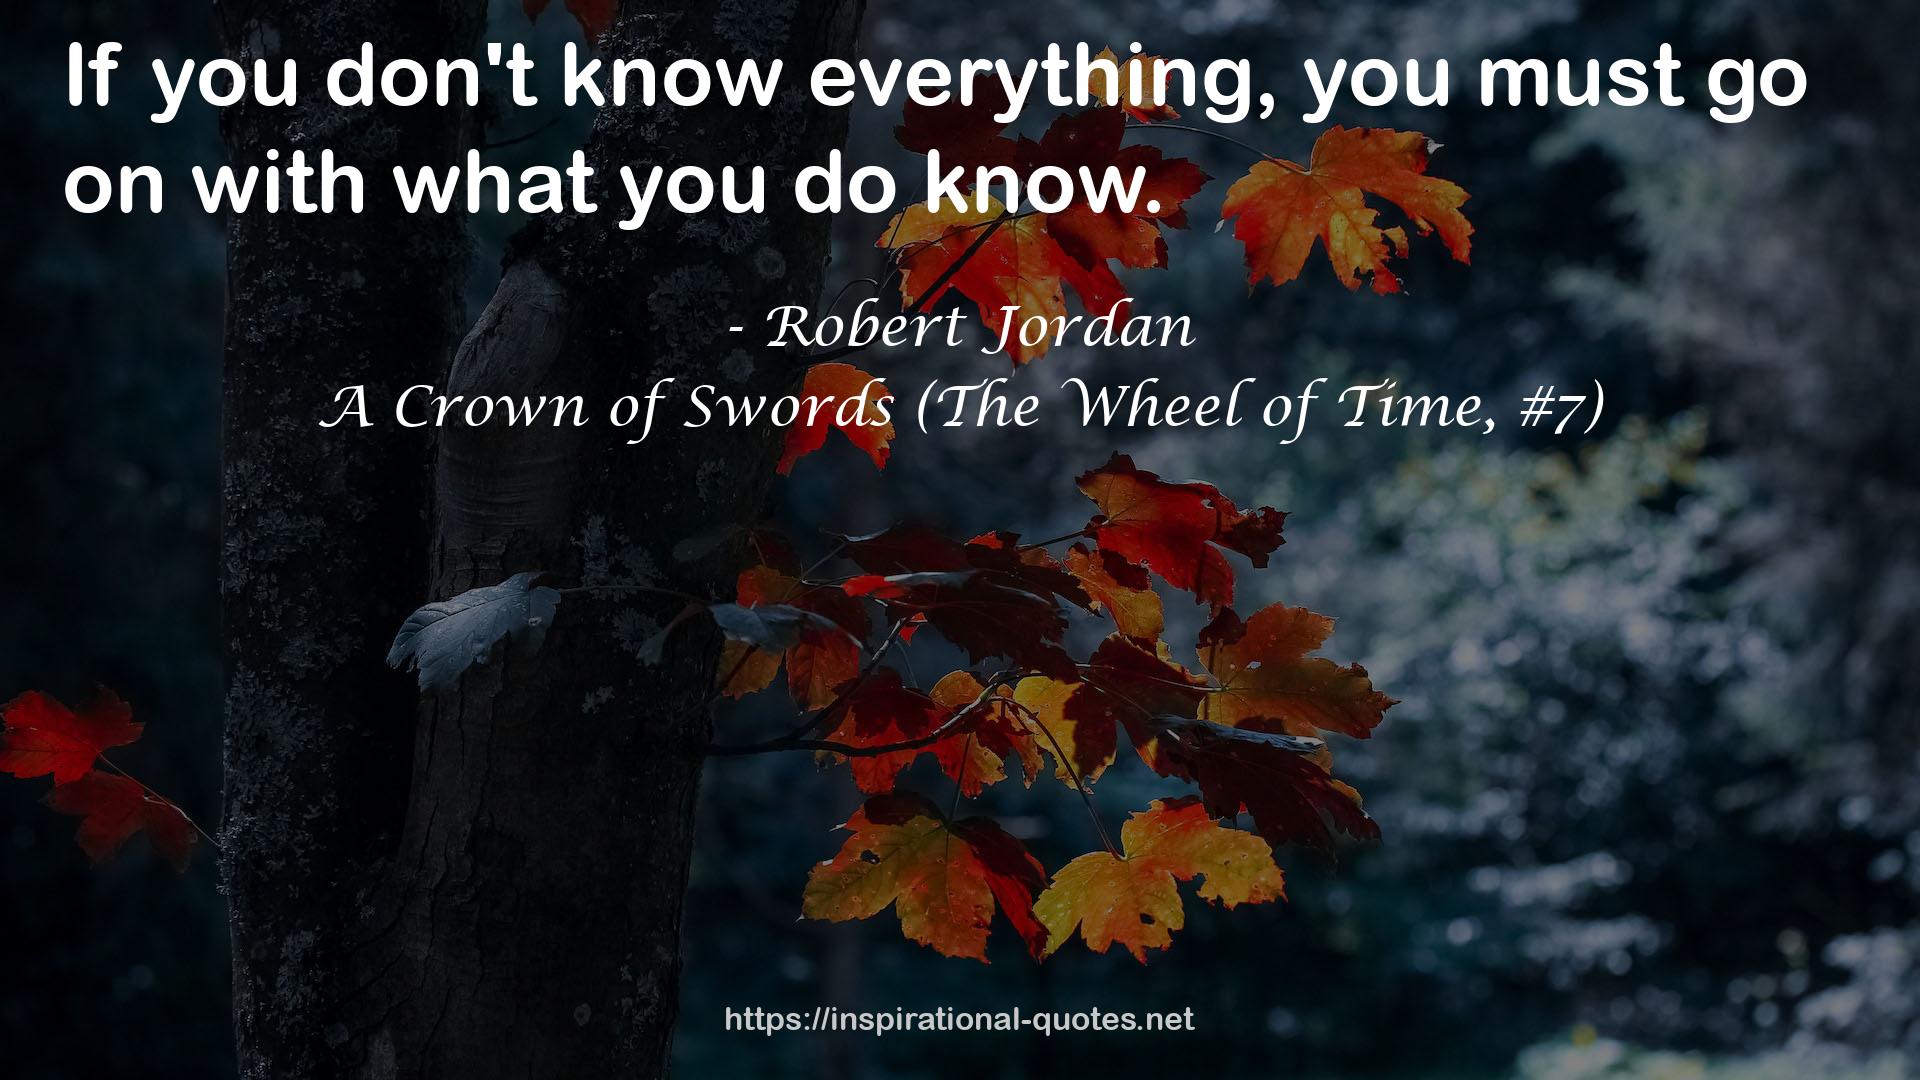 A Crown of Swords (The Wheel of Time, #7) QUOTES